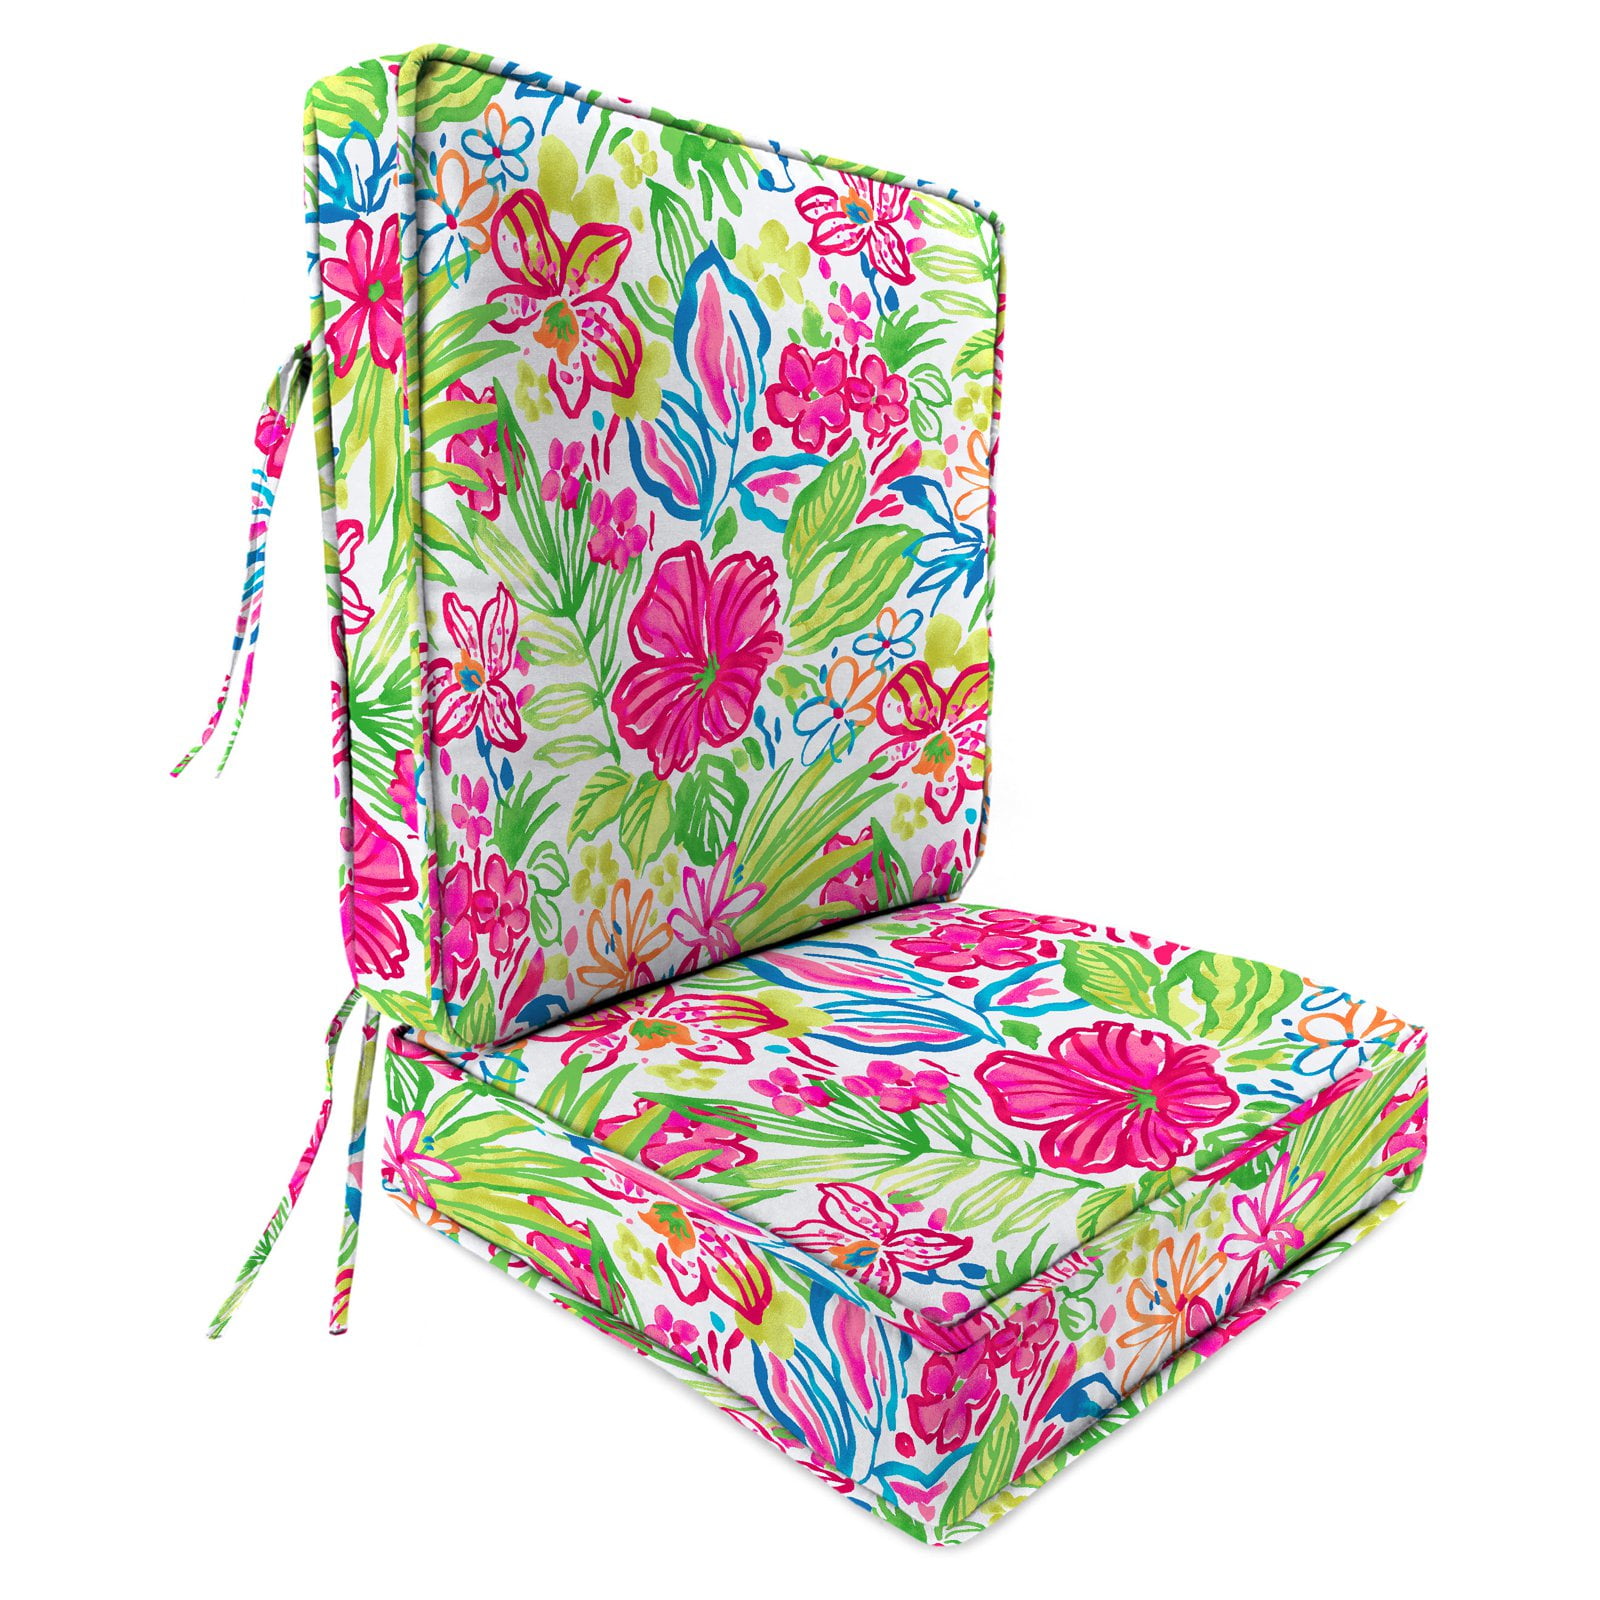 Simple Patio Chair Cushions Walmart for Small Space